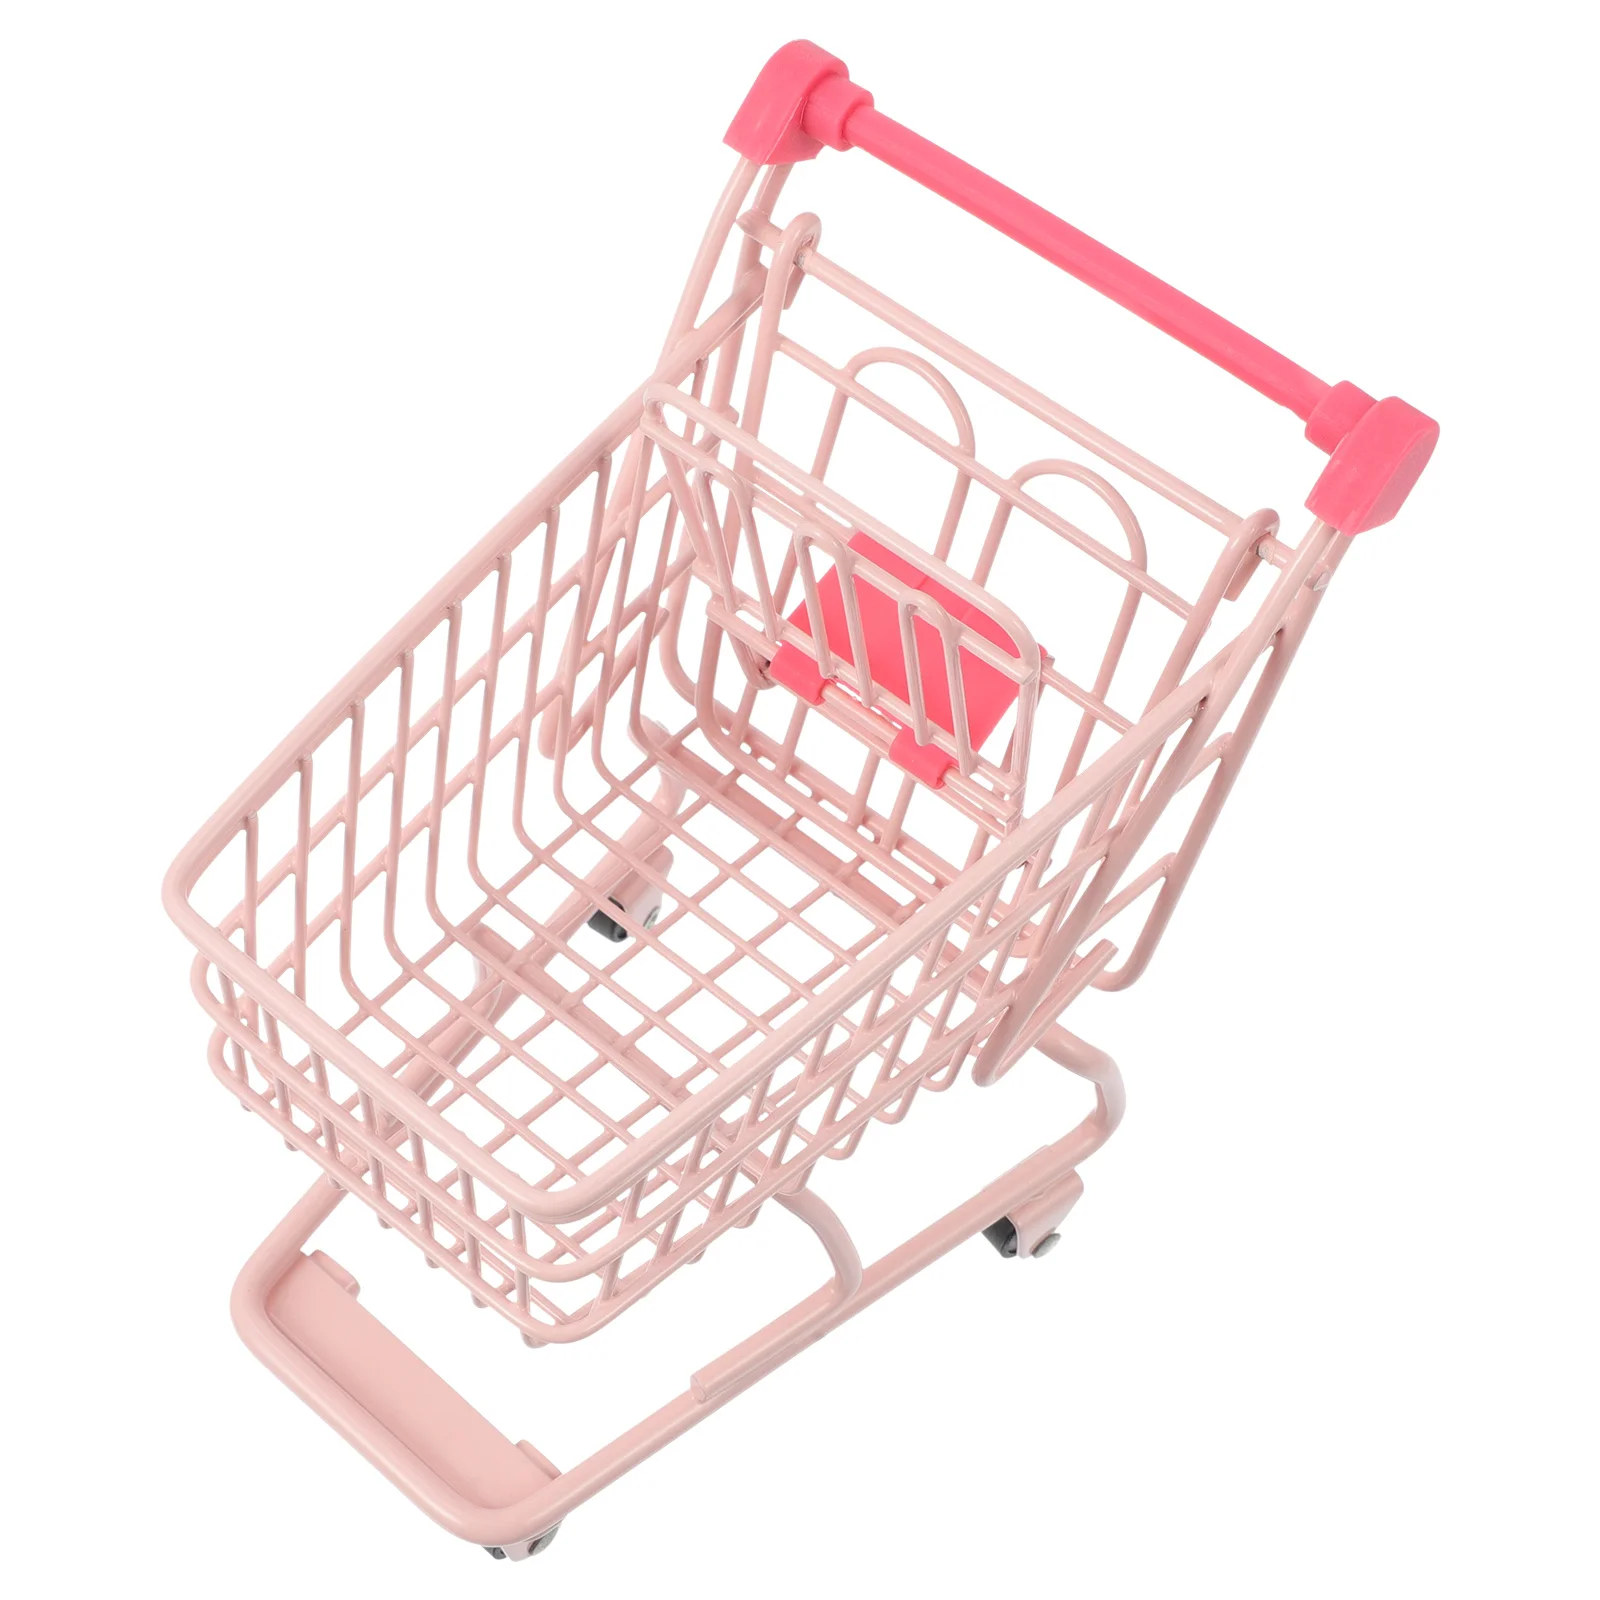 

Cart Shopping Kids Trolley Supermarket Wheels With Small Dollhouse Metal Folding Kids Handcart Grocery Food Dolls S